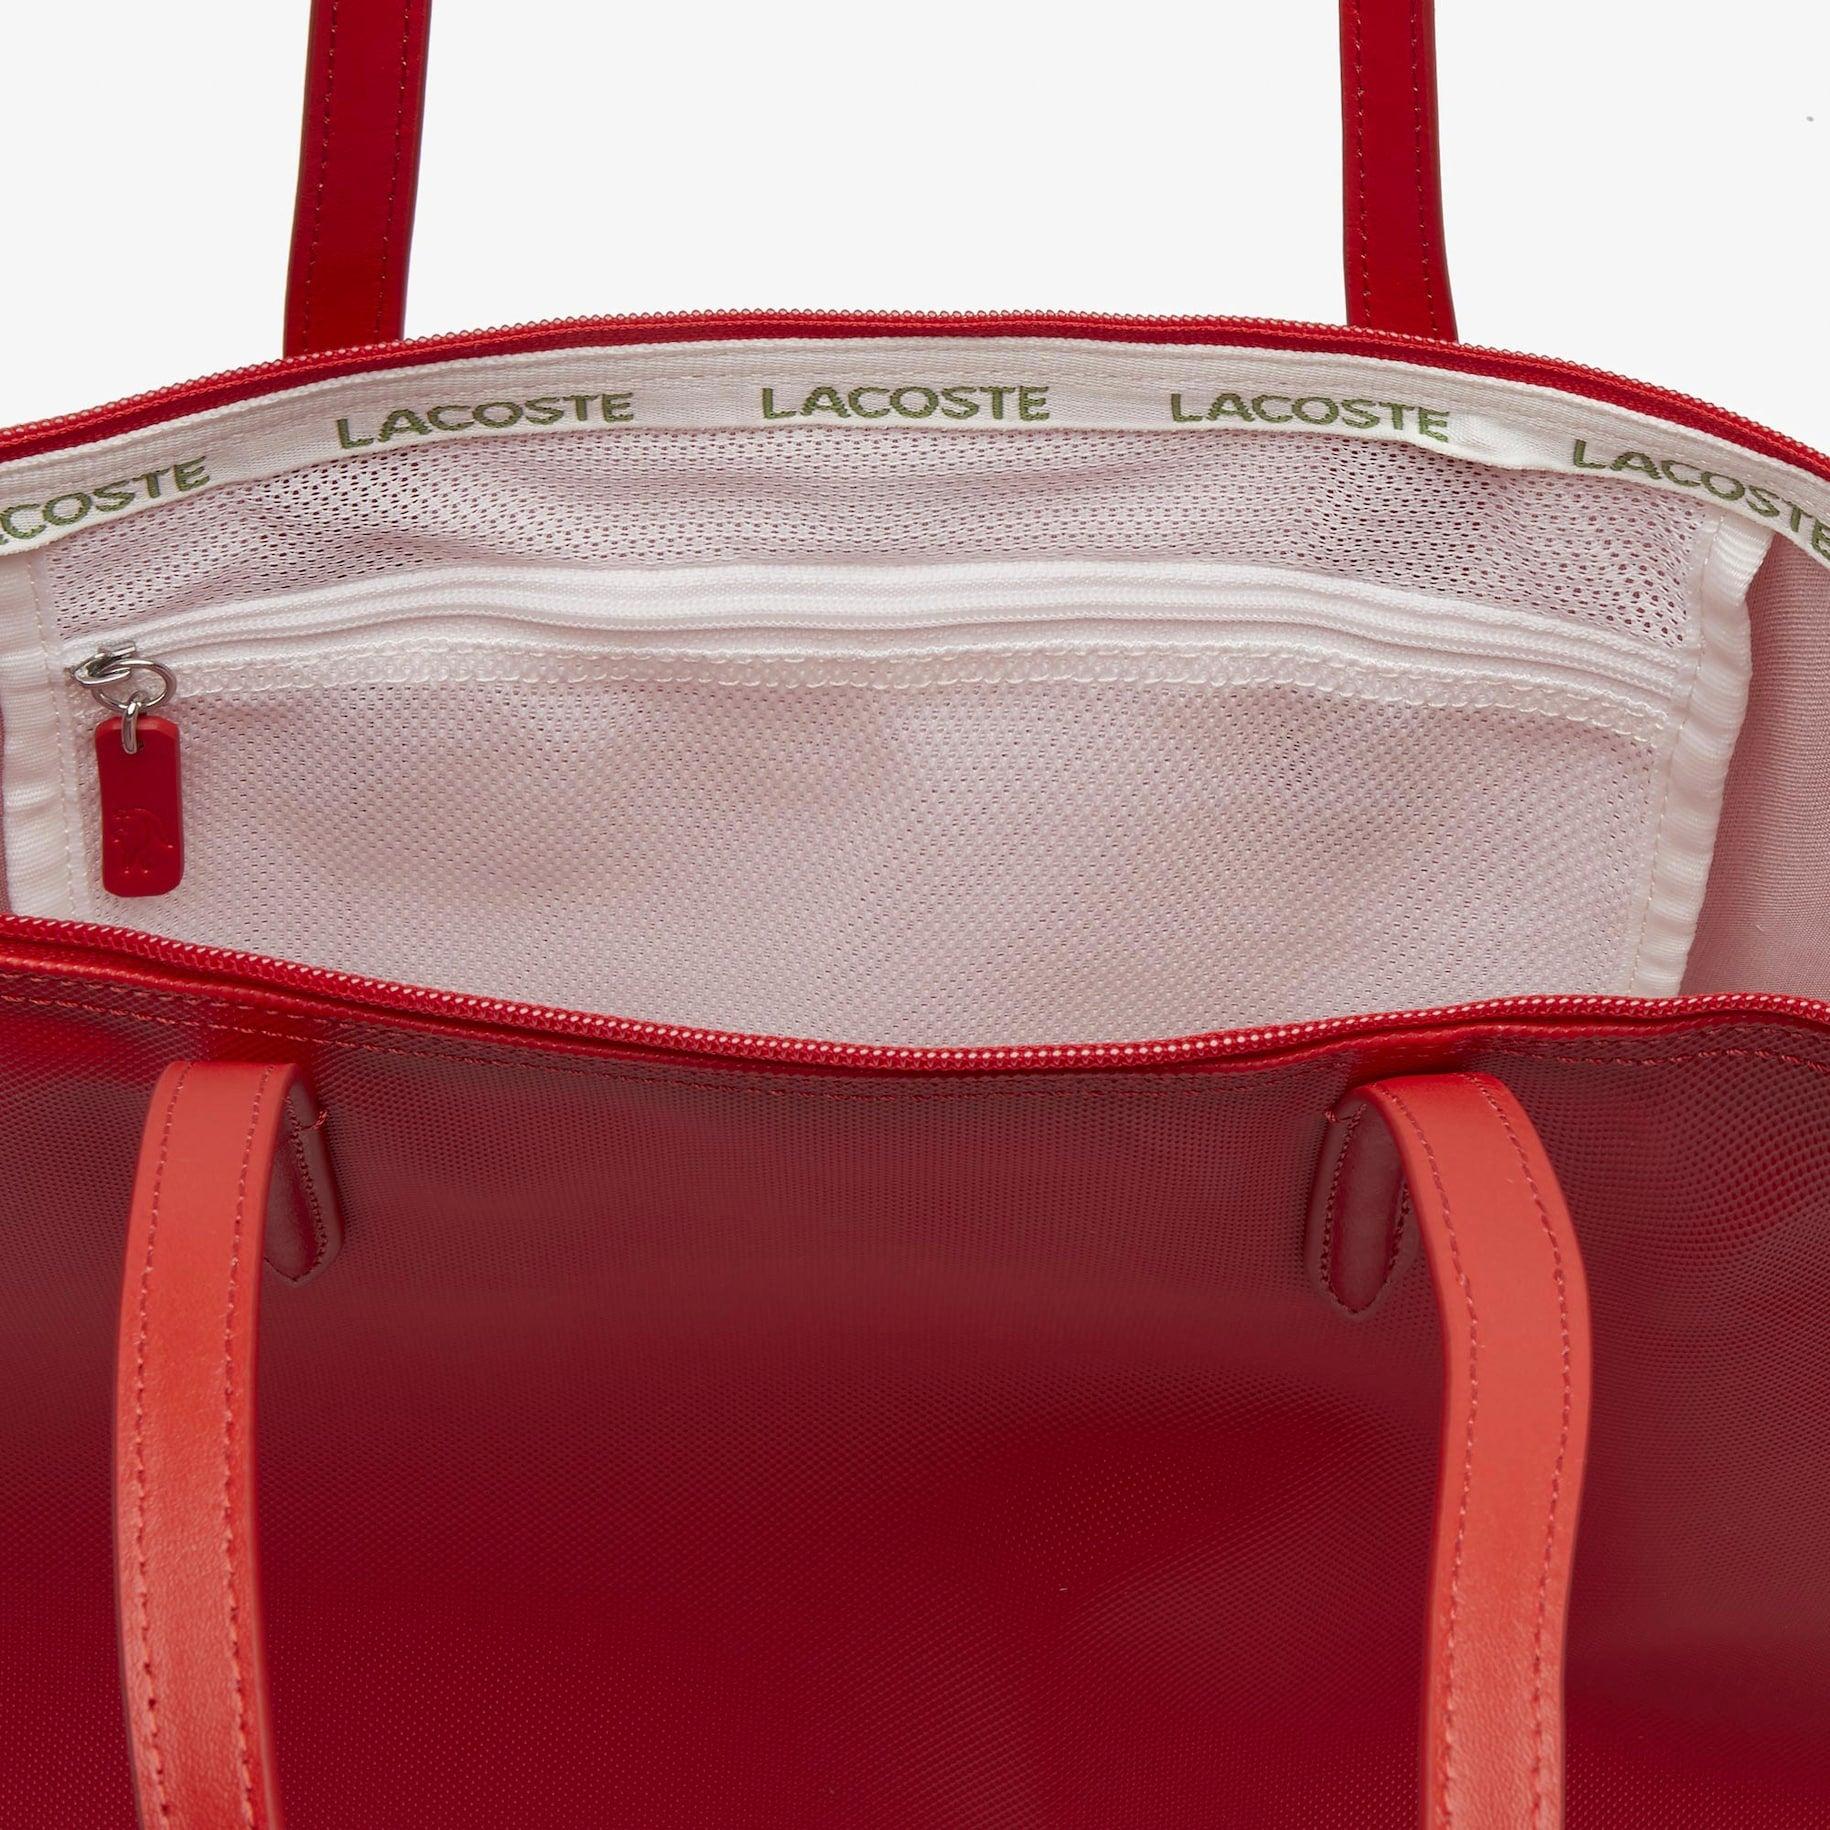 NWT Authentic Lacoste Red Tote Bag